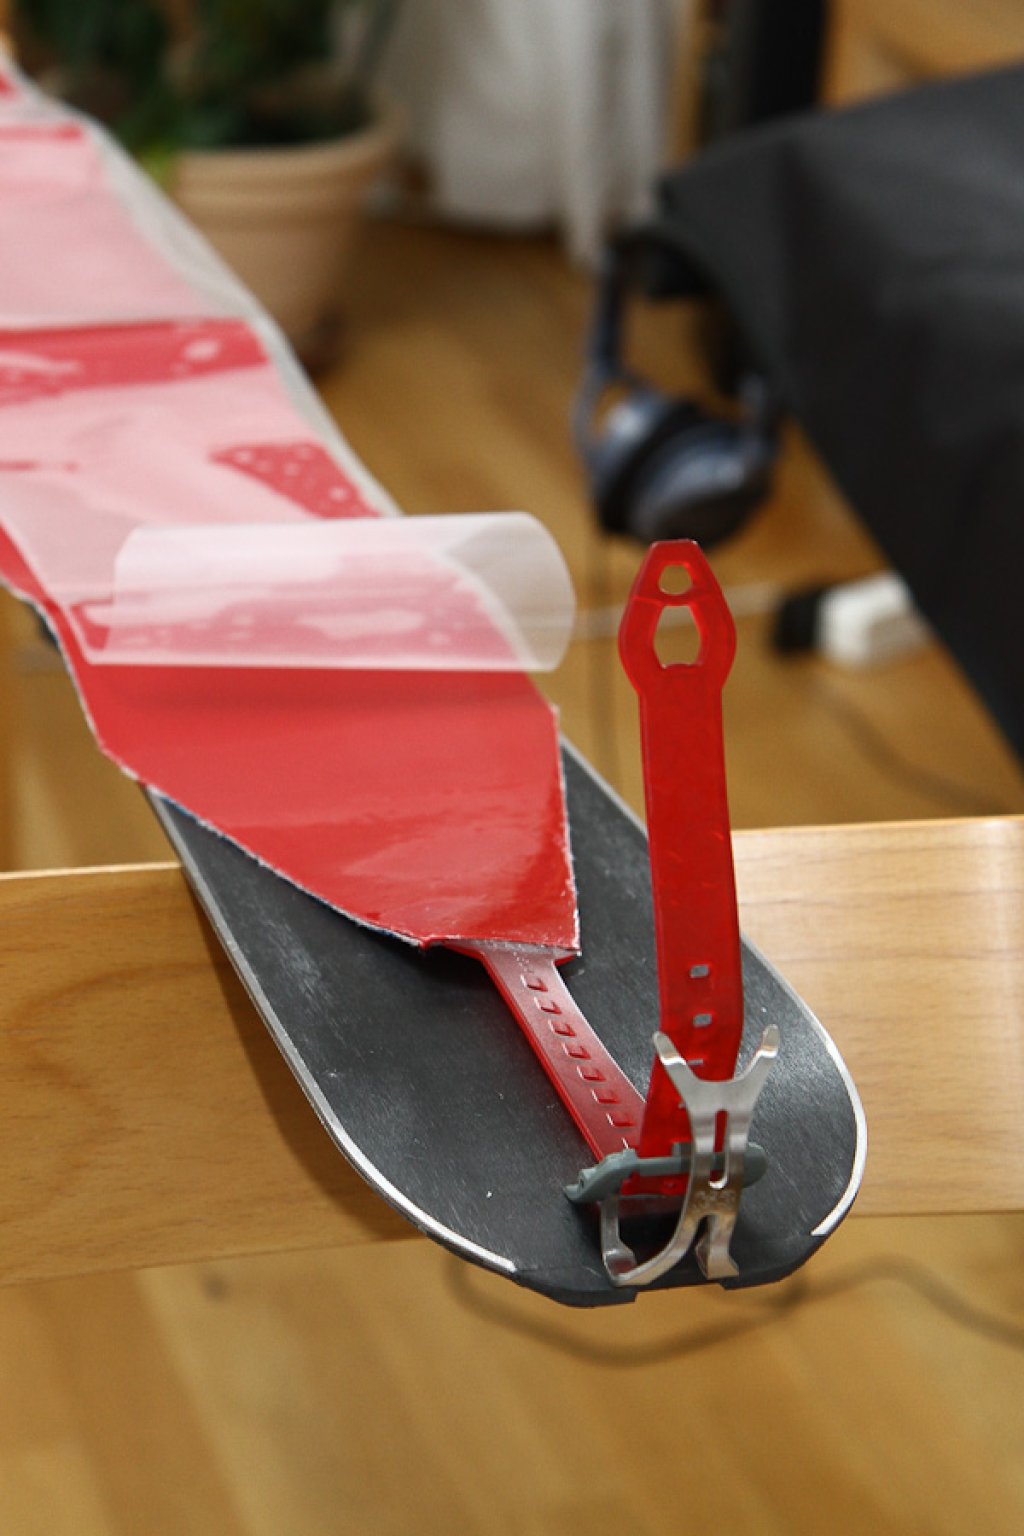 After setting the end hook and cutting the coat to length if necessary, remove the protective film from the adhesive